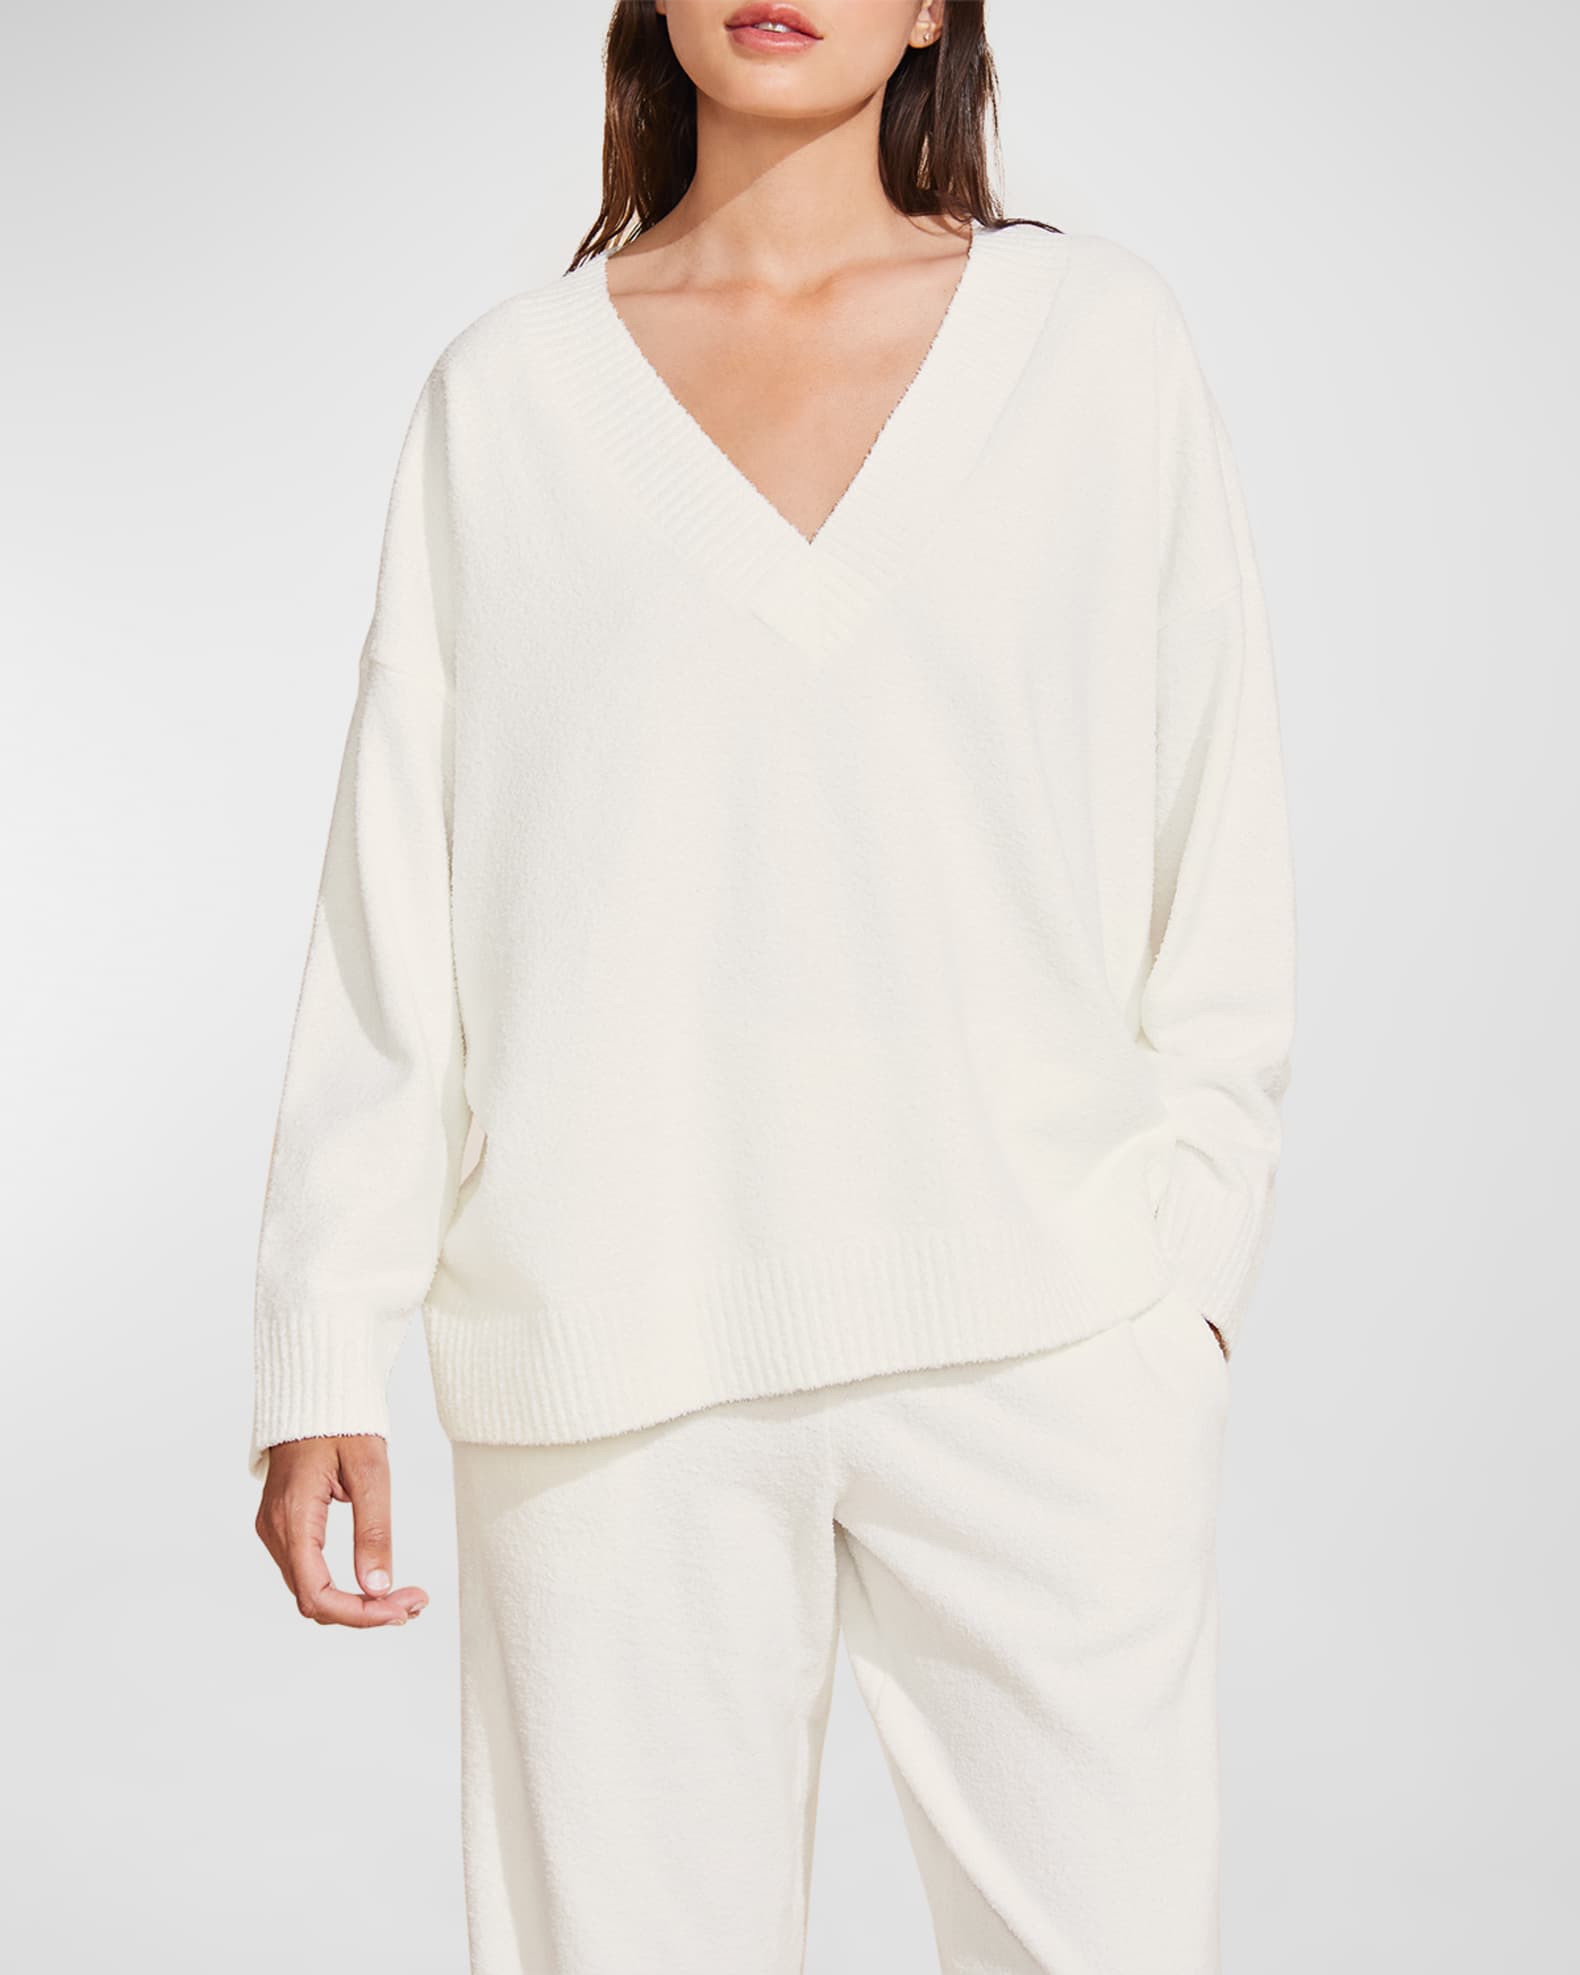 Eberjey Recycled Boucle V-Neck Sweater | Neiman Marcus